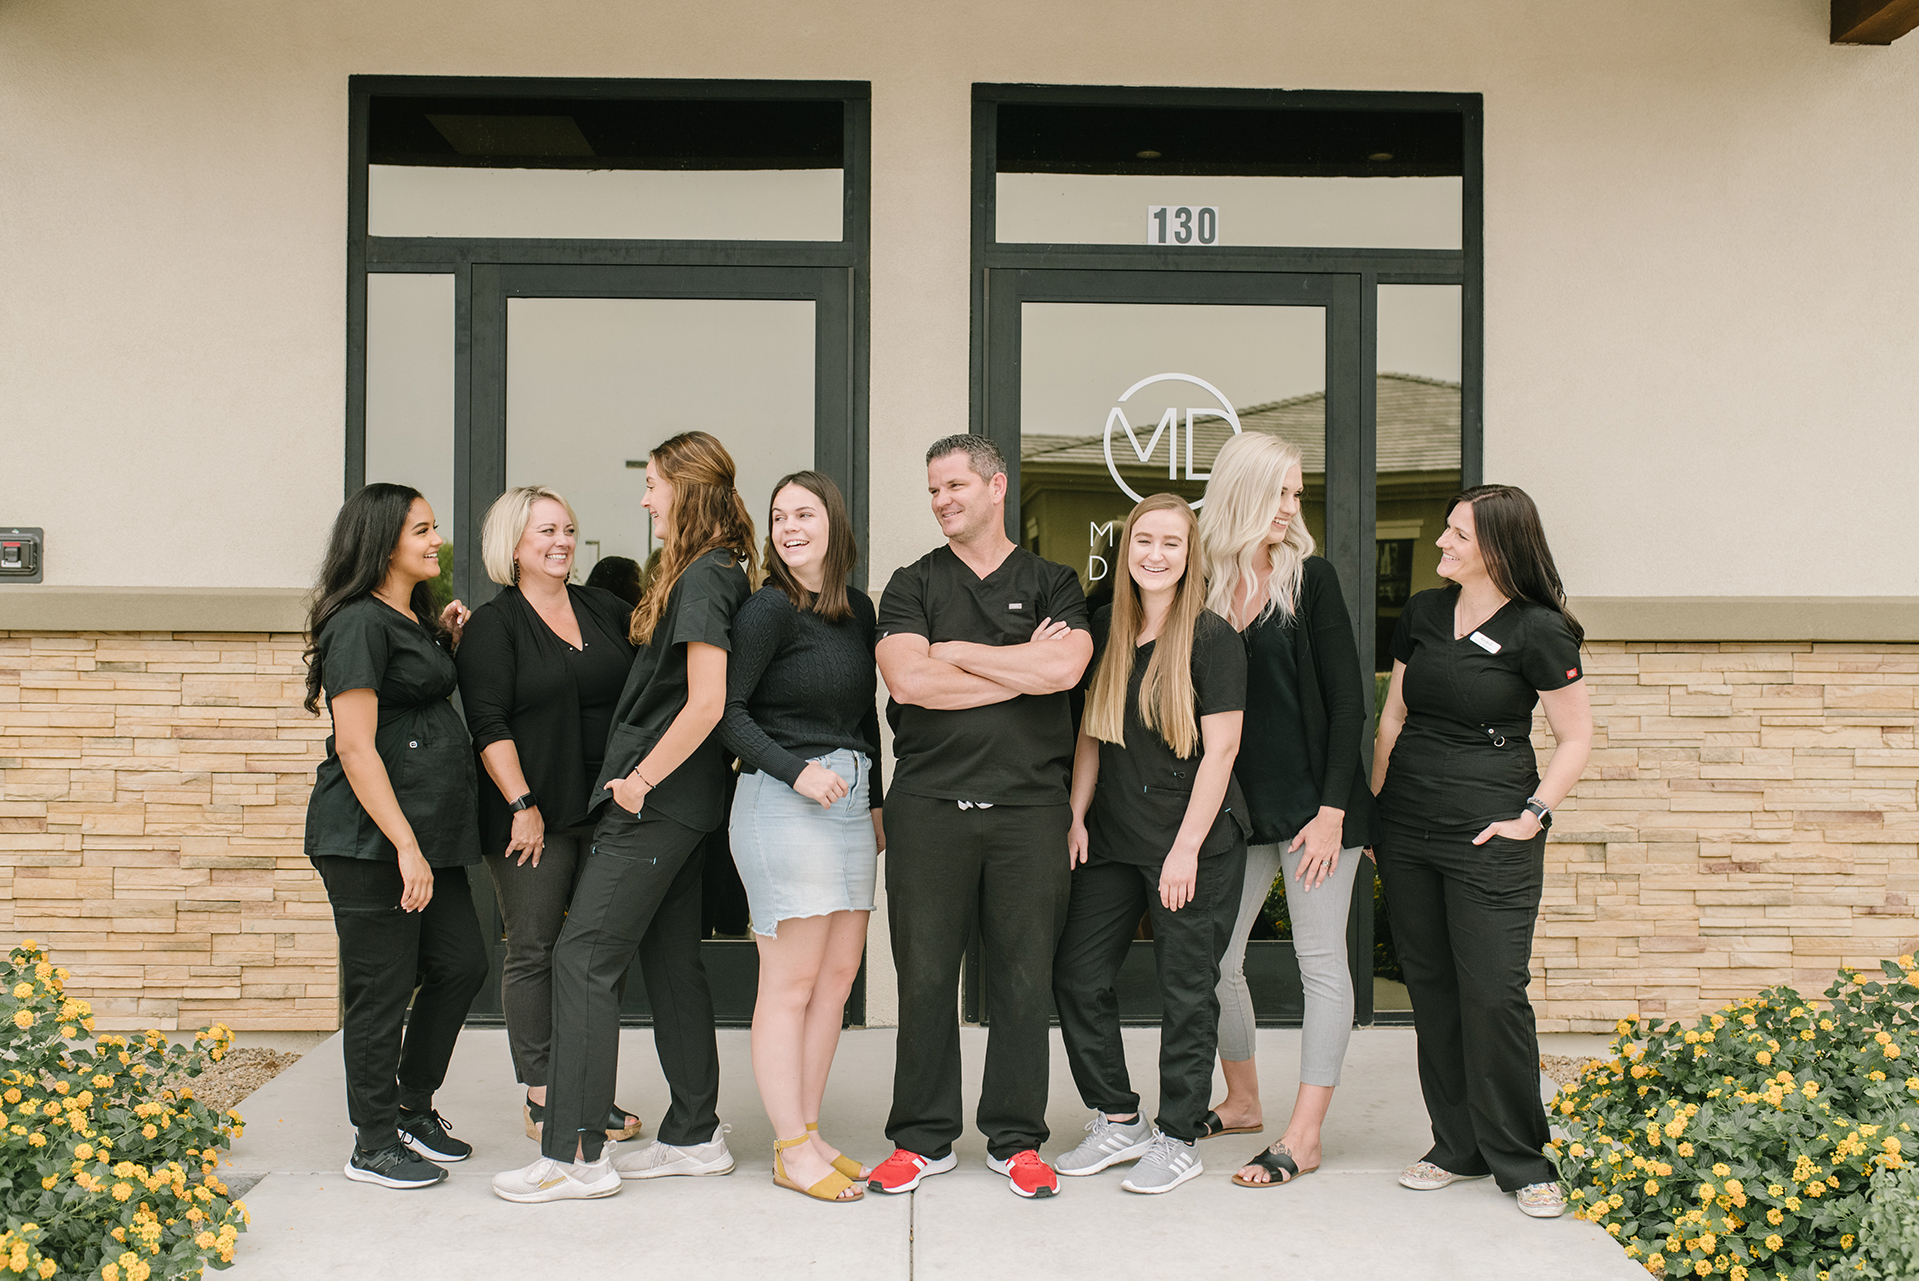 Cosmetic Dentist in Queen Creek, AZ Who Offers Affordable Teeth Whitening Services